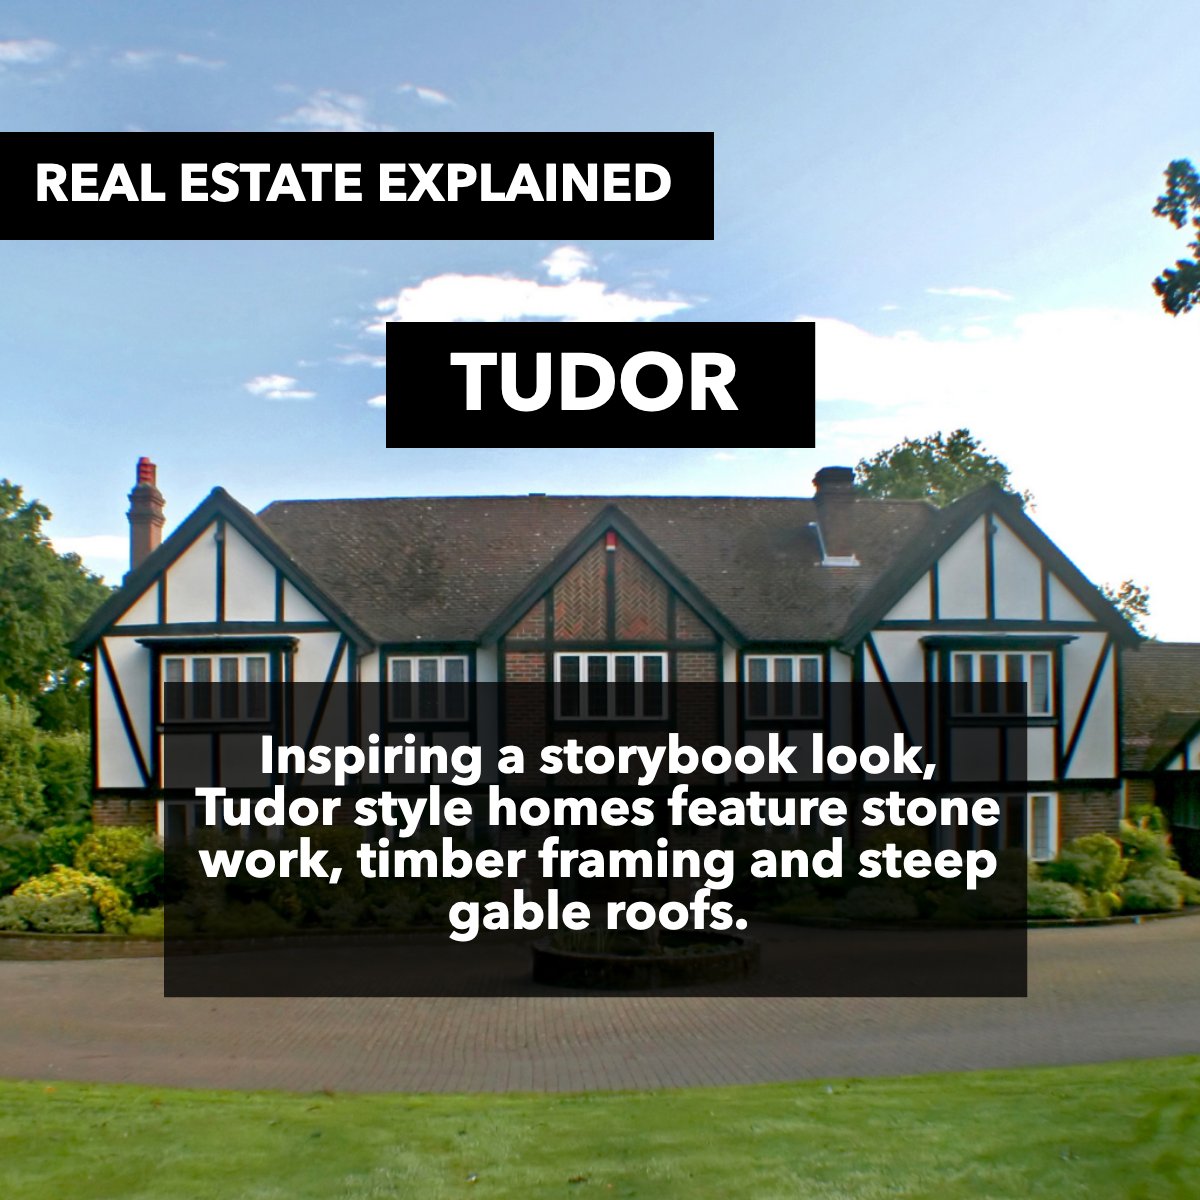 Charming, intricate, and classic, Tudor-style homes have been an iconic home style in North America since the 19th century. 🏘️

#tudorstylearchitecture  #tudorstylehome  #styletudors
#callniecie